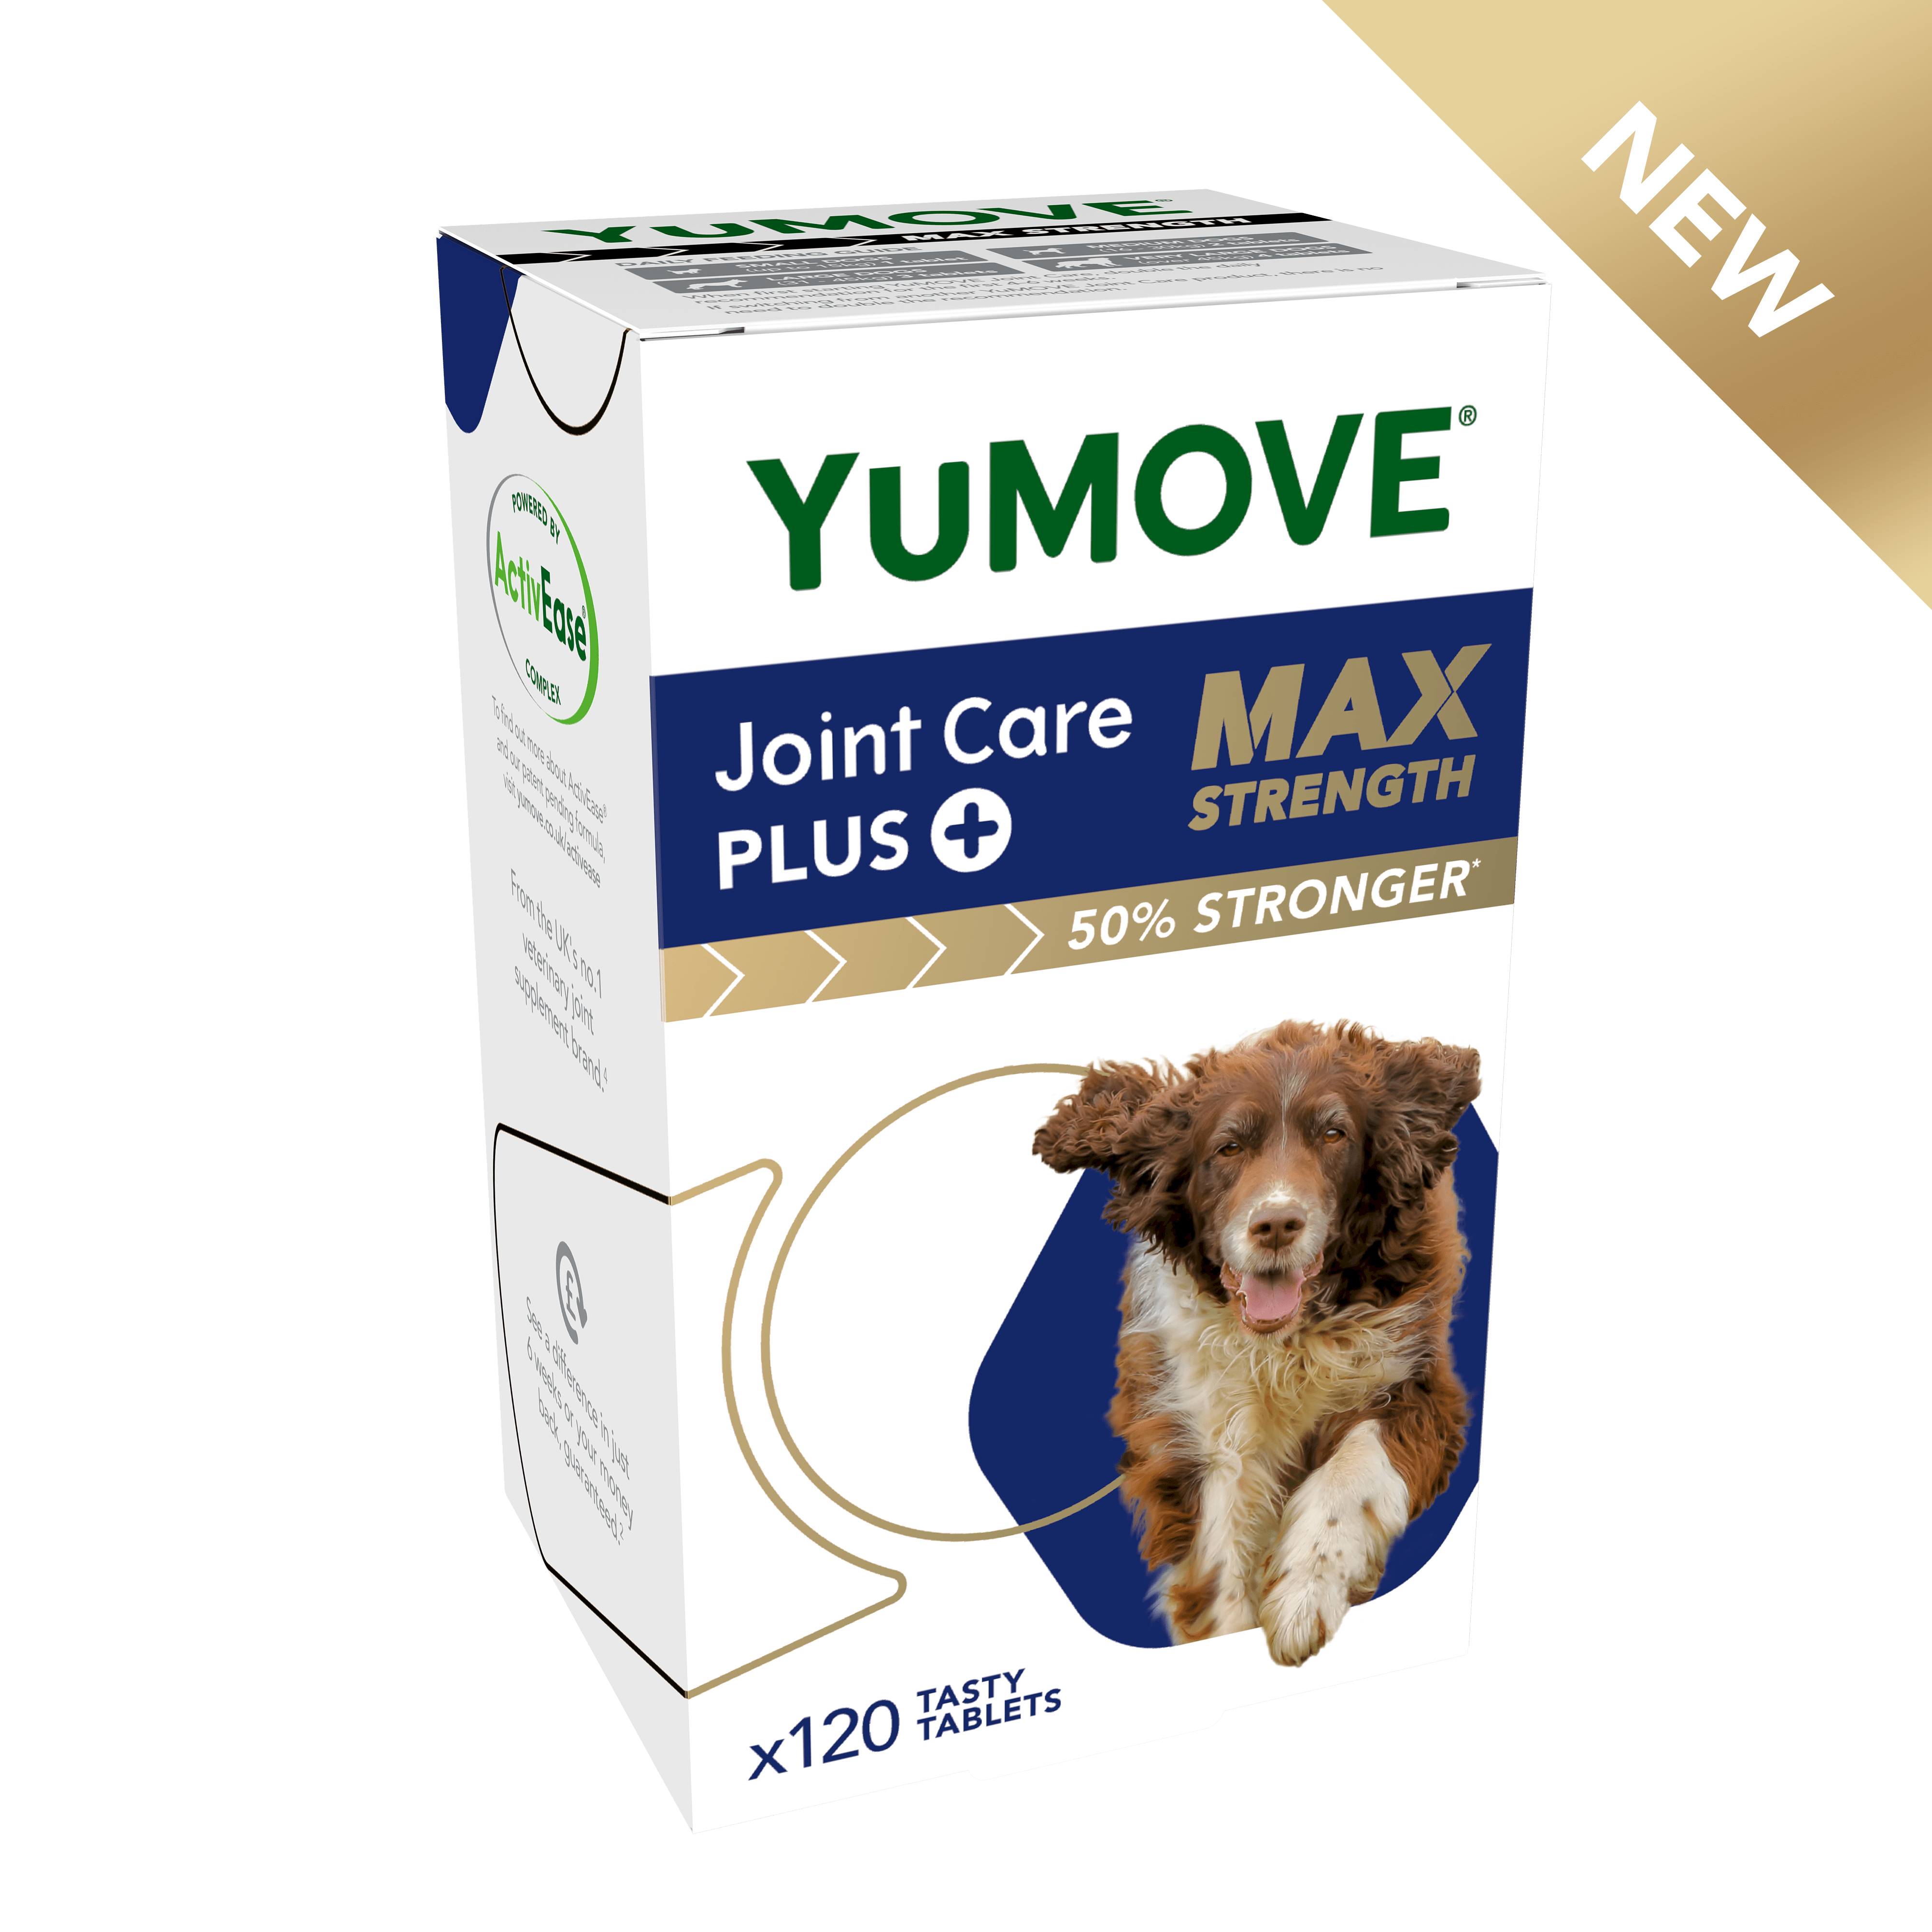 Joint Care PLUS Max Strength for Dogs [Recharge Upgrade from Plus]